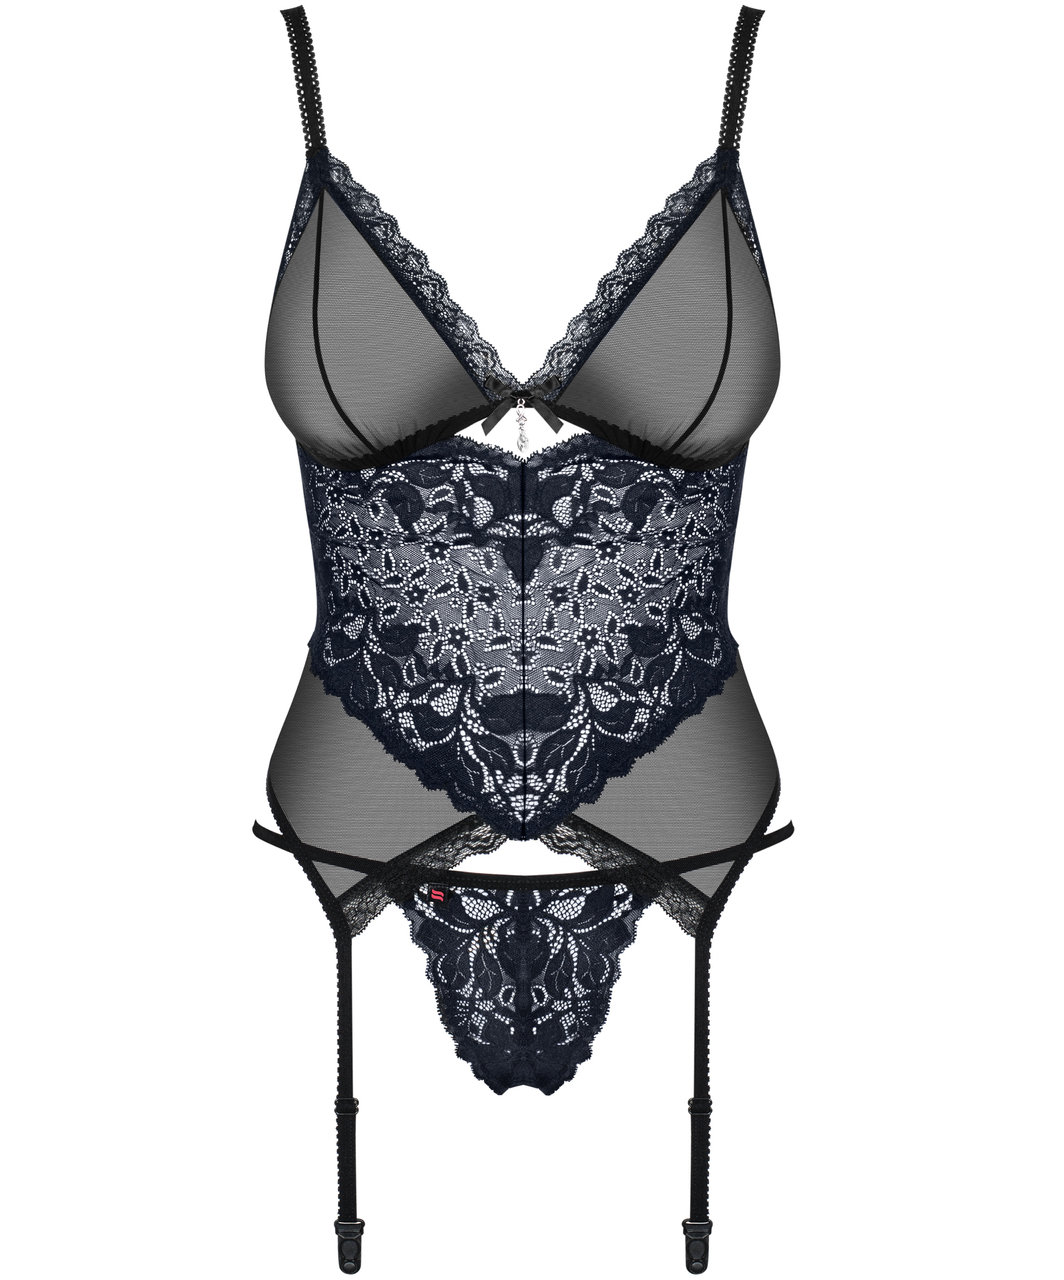 Obsessive dark blue lace basque with string